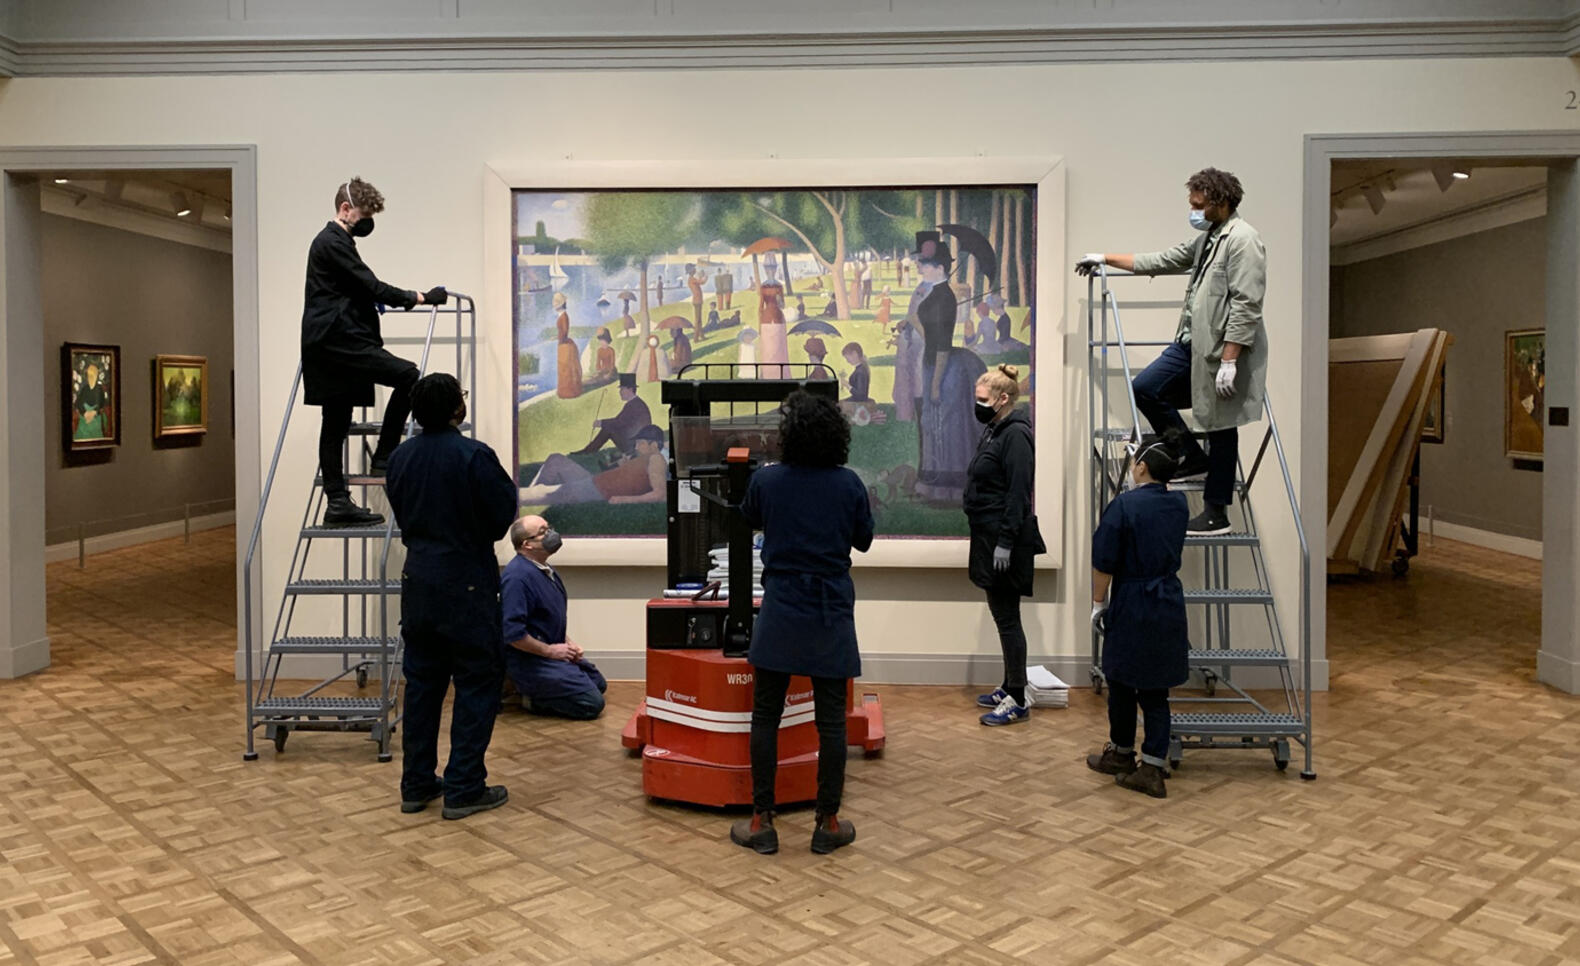 Several people gathered around the painting "A Sunday Afternoon on the Island of La Grande Jatte" all putting a frame onto it